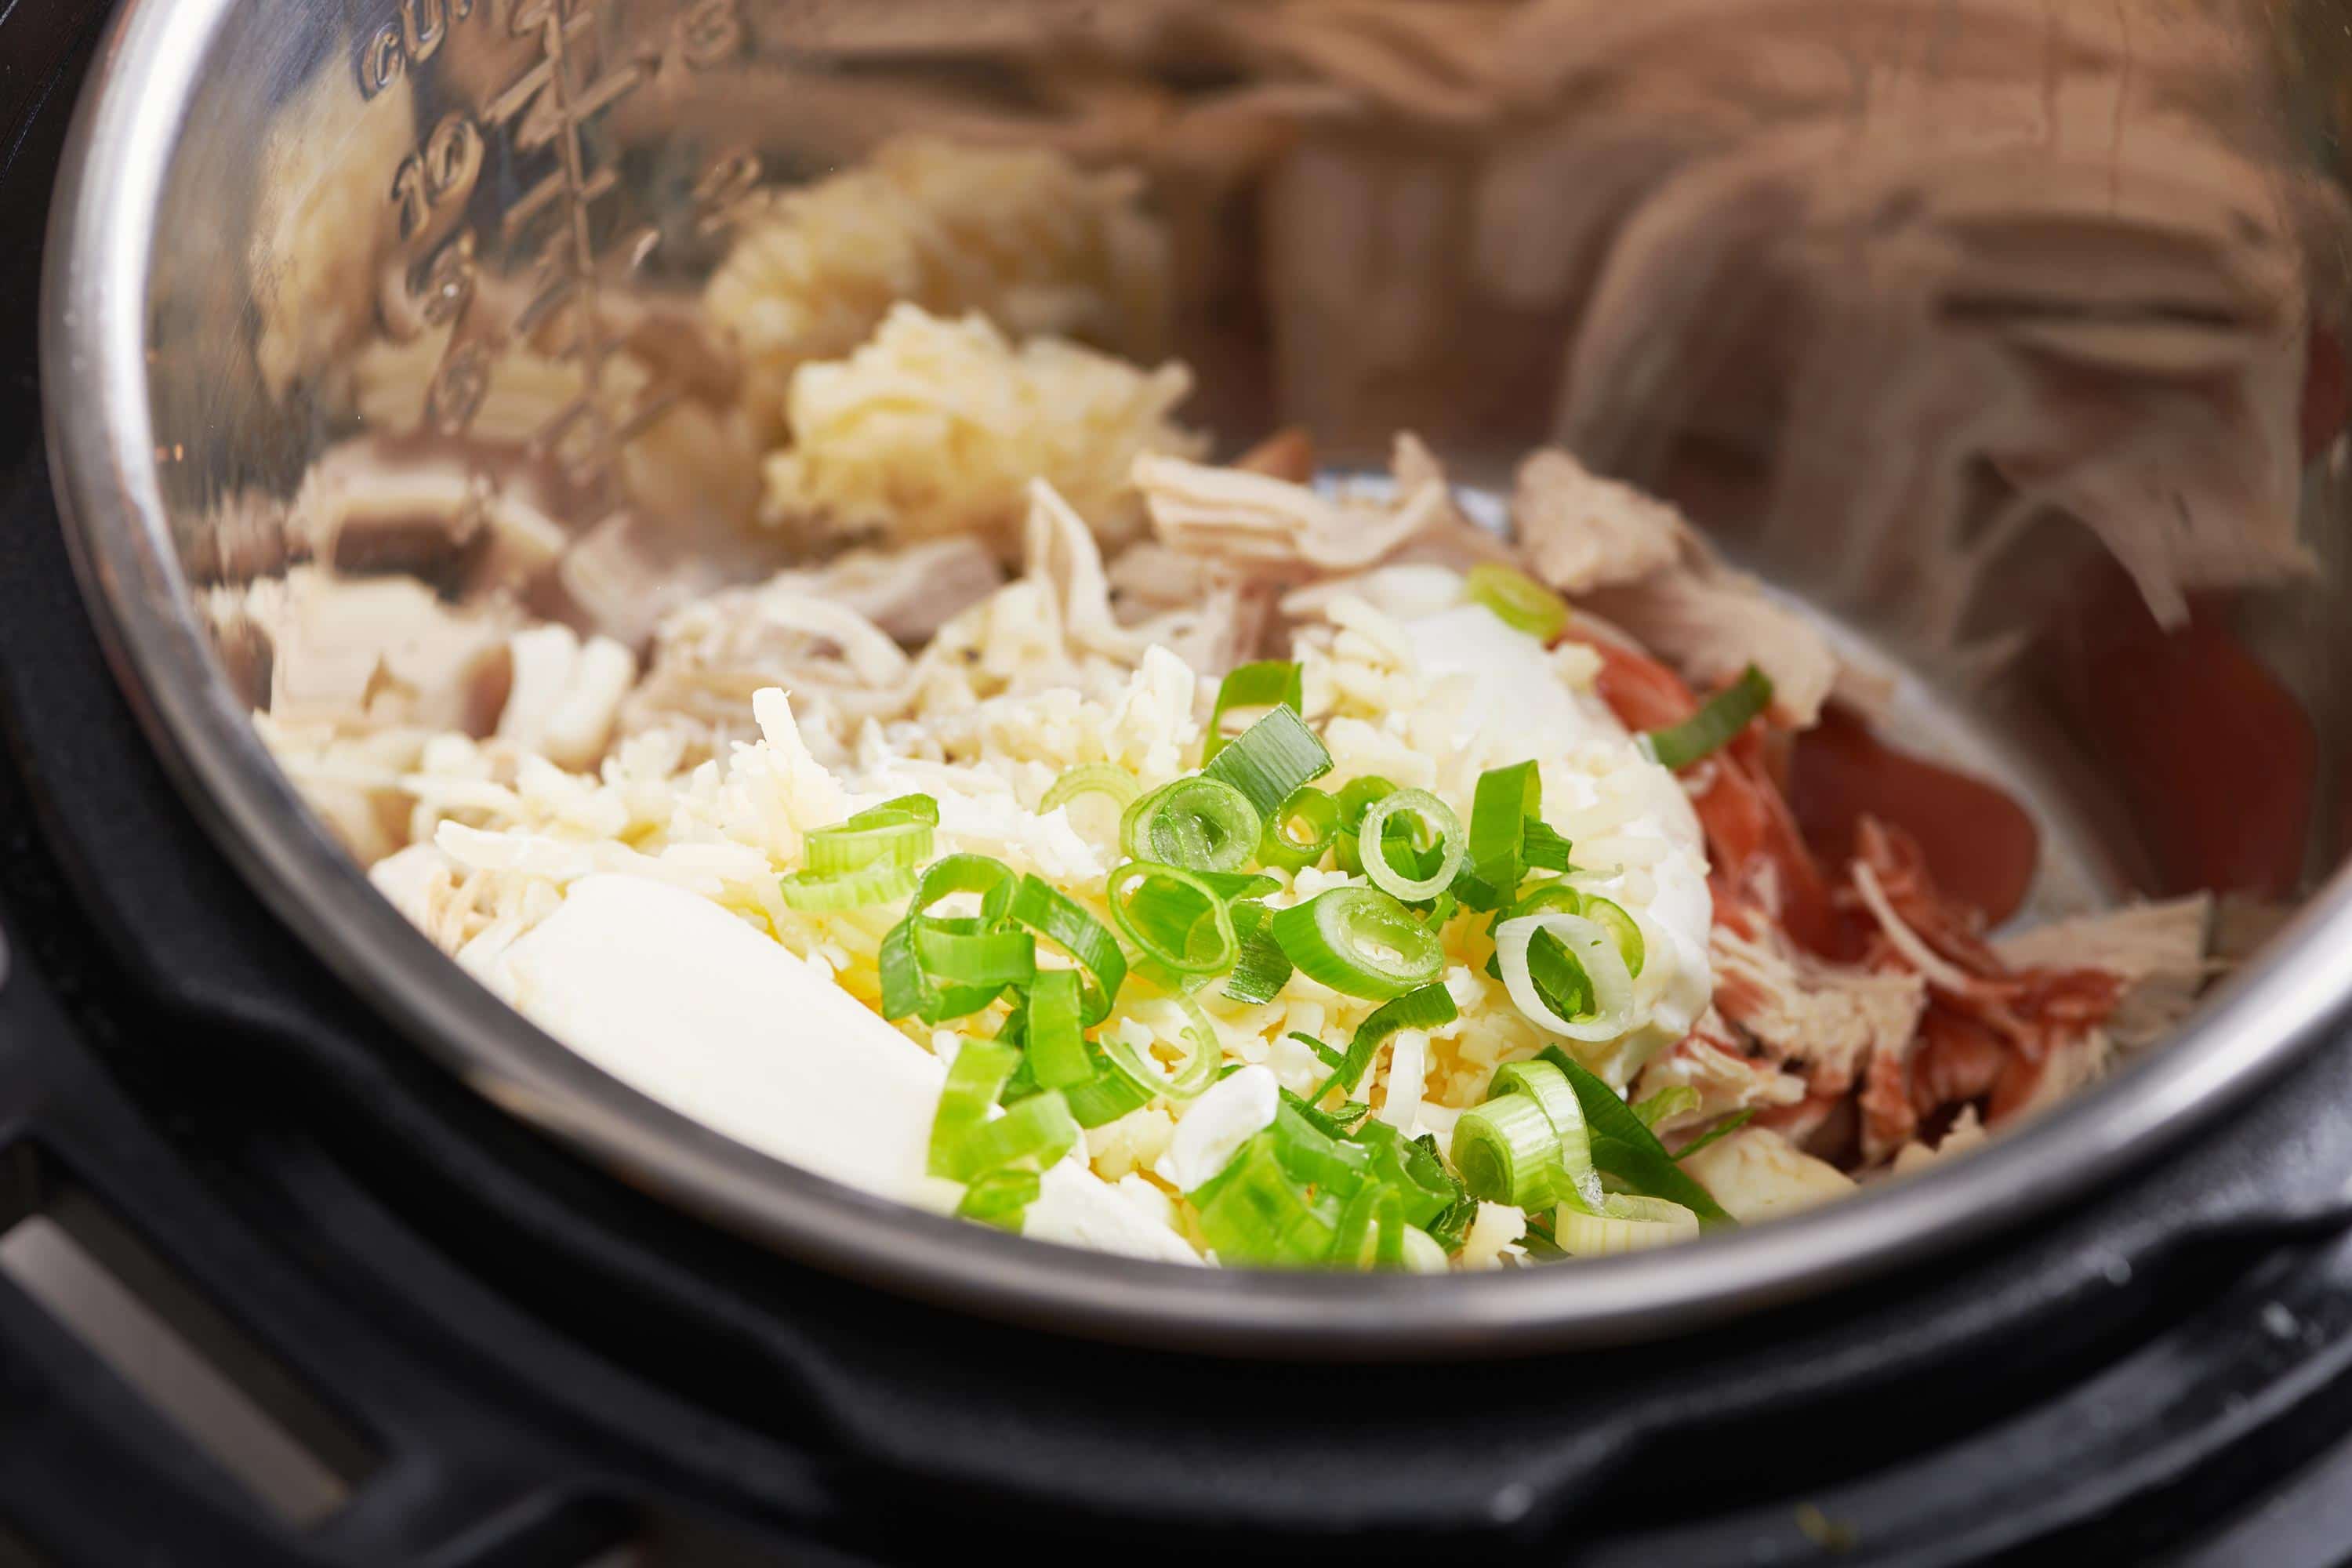 Scallions, cream cheese, and other ingredients in an Instant Pot.